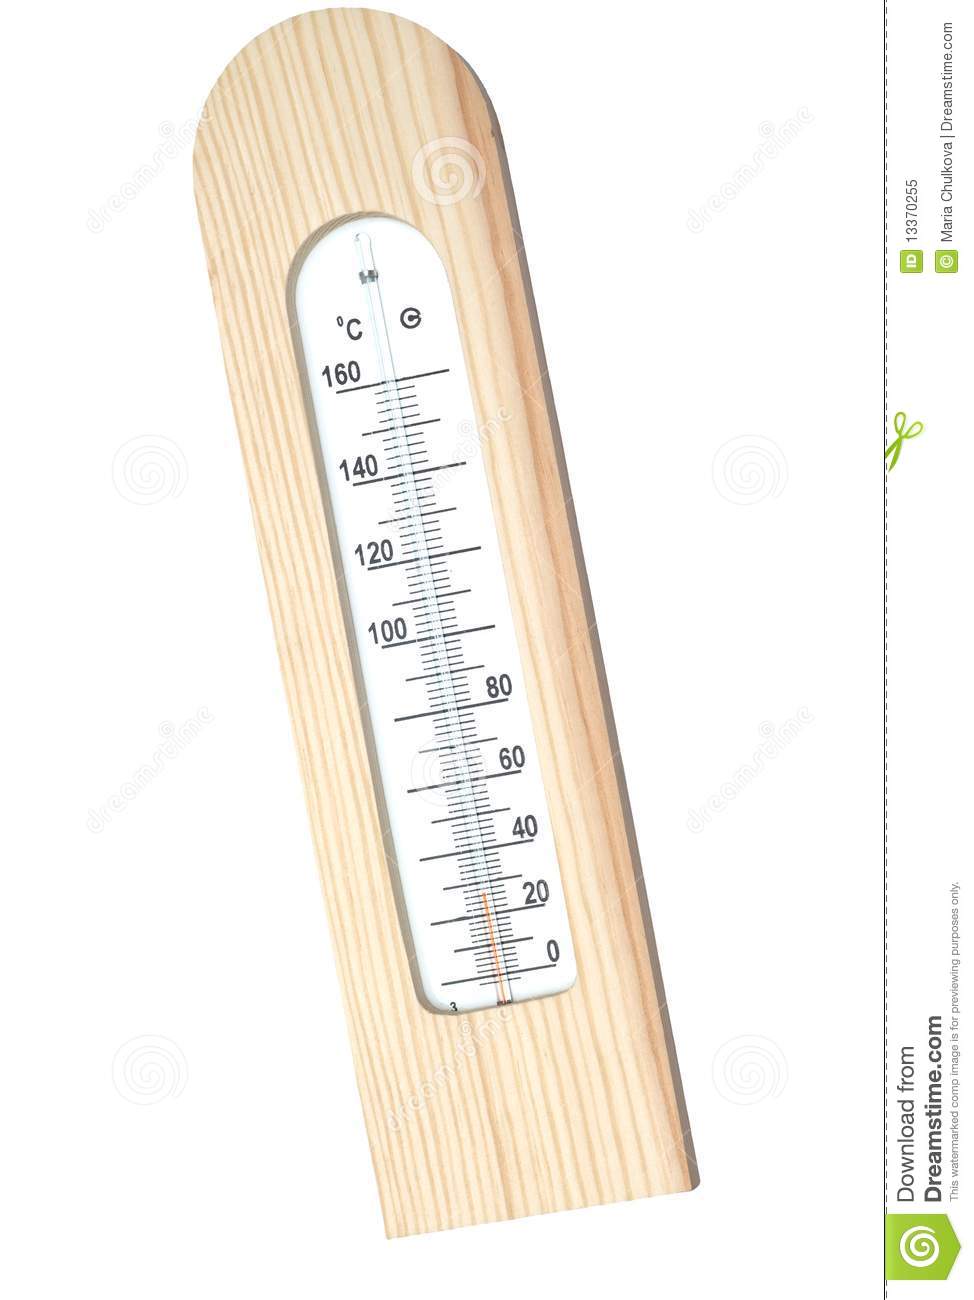 Wooden Thermometer With Celsius Scale Royalty Free Stock Photo   Image